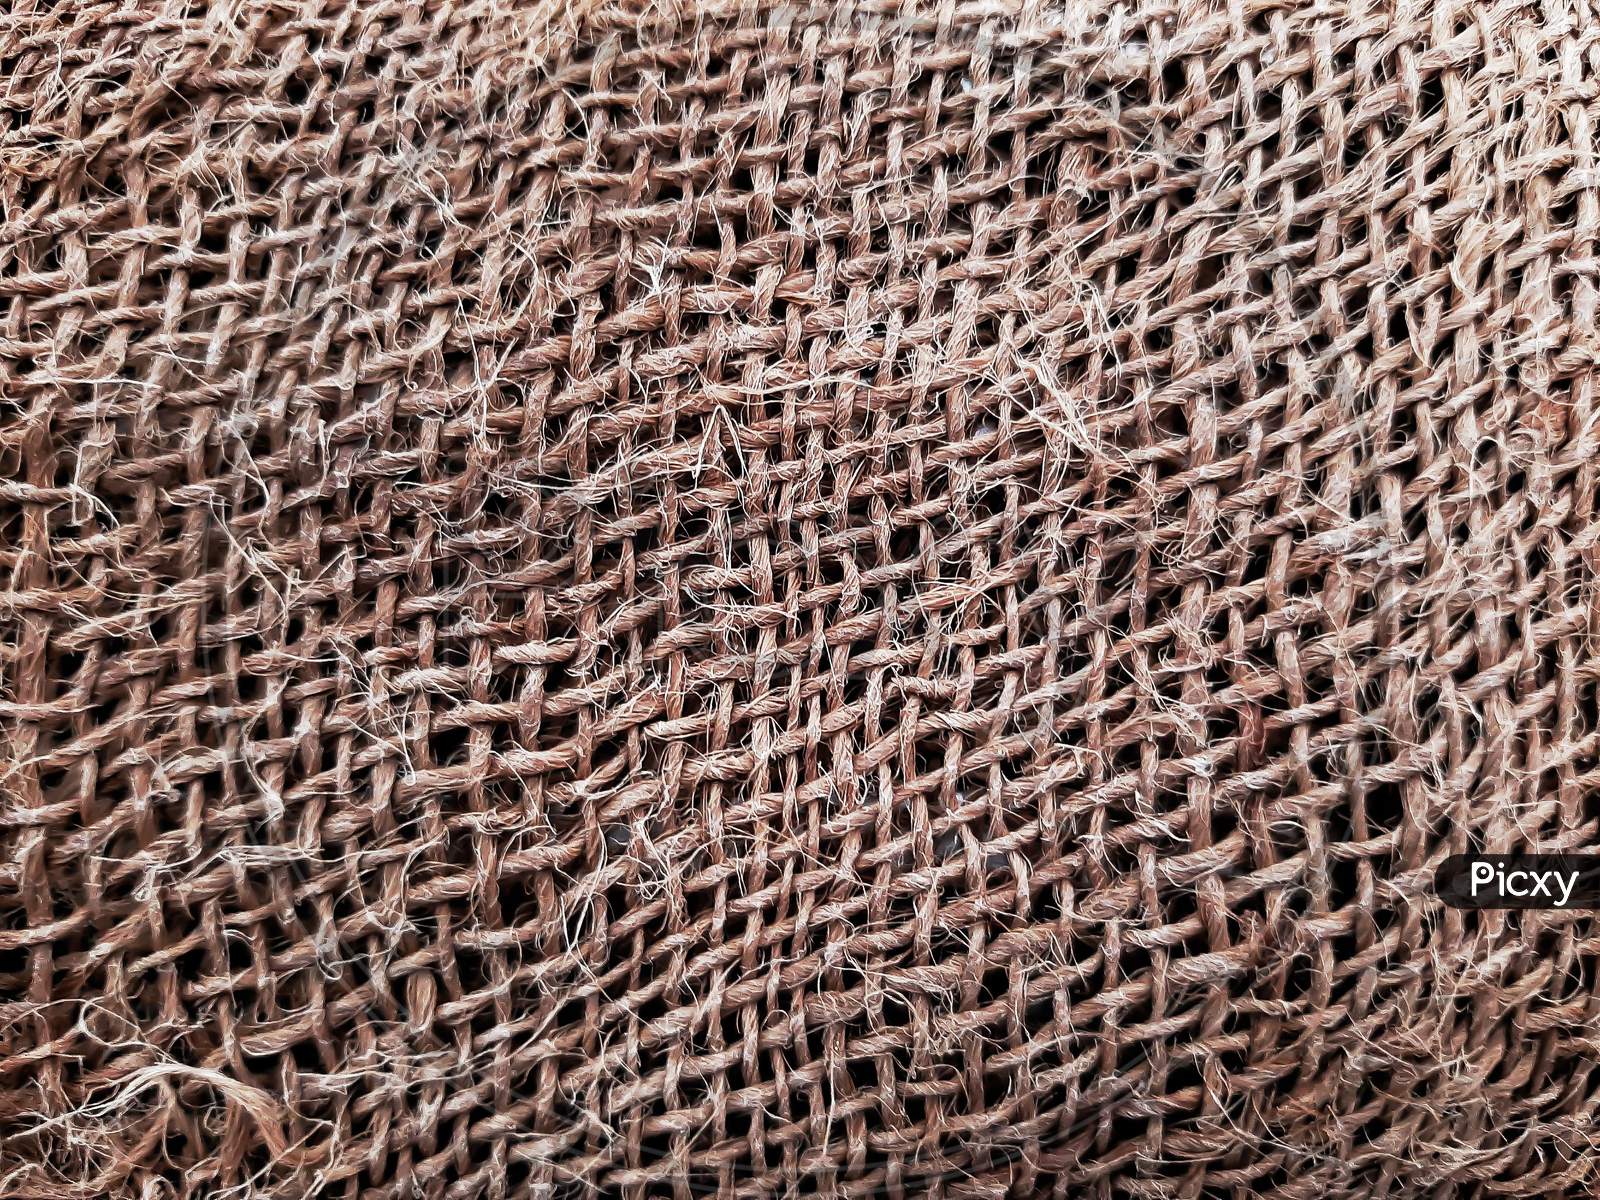 A cooton cloth giving details of the strings from which it is made up of.